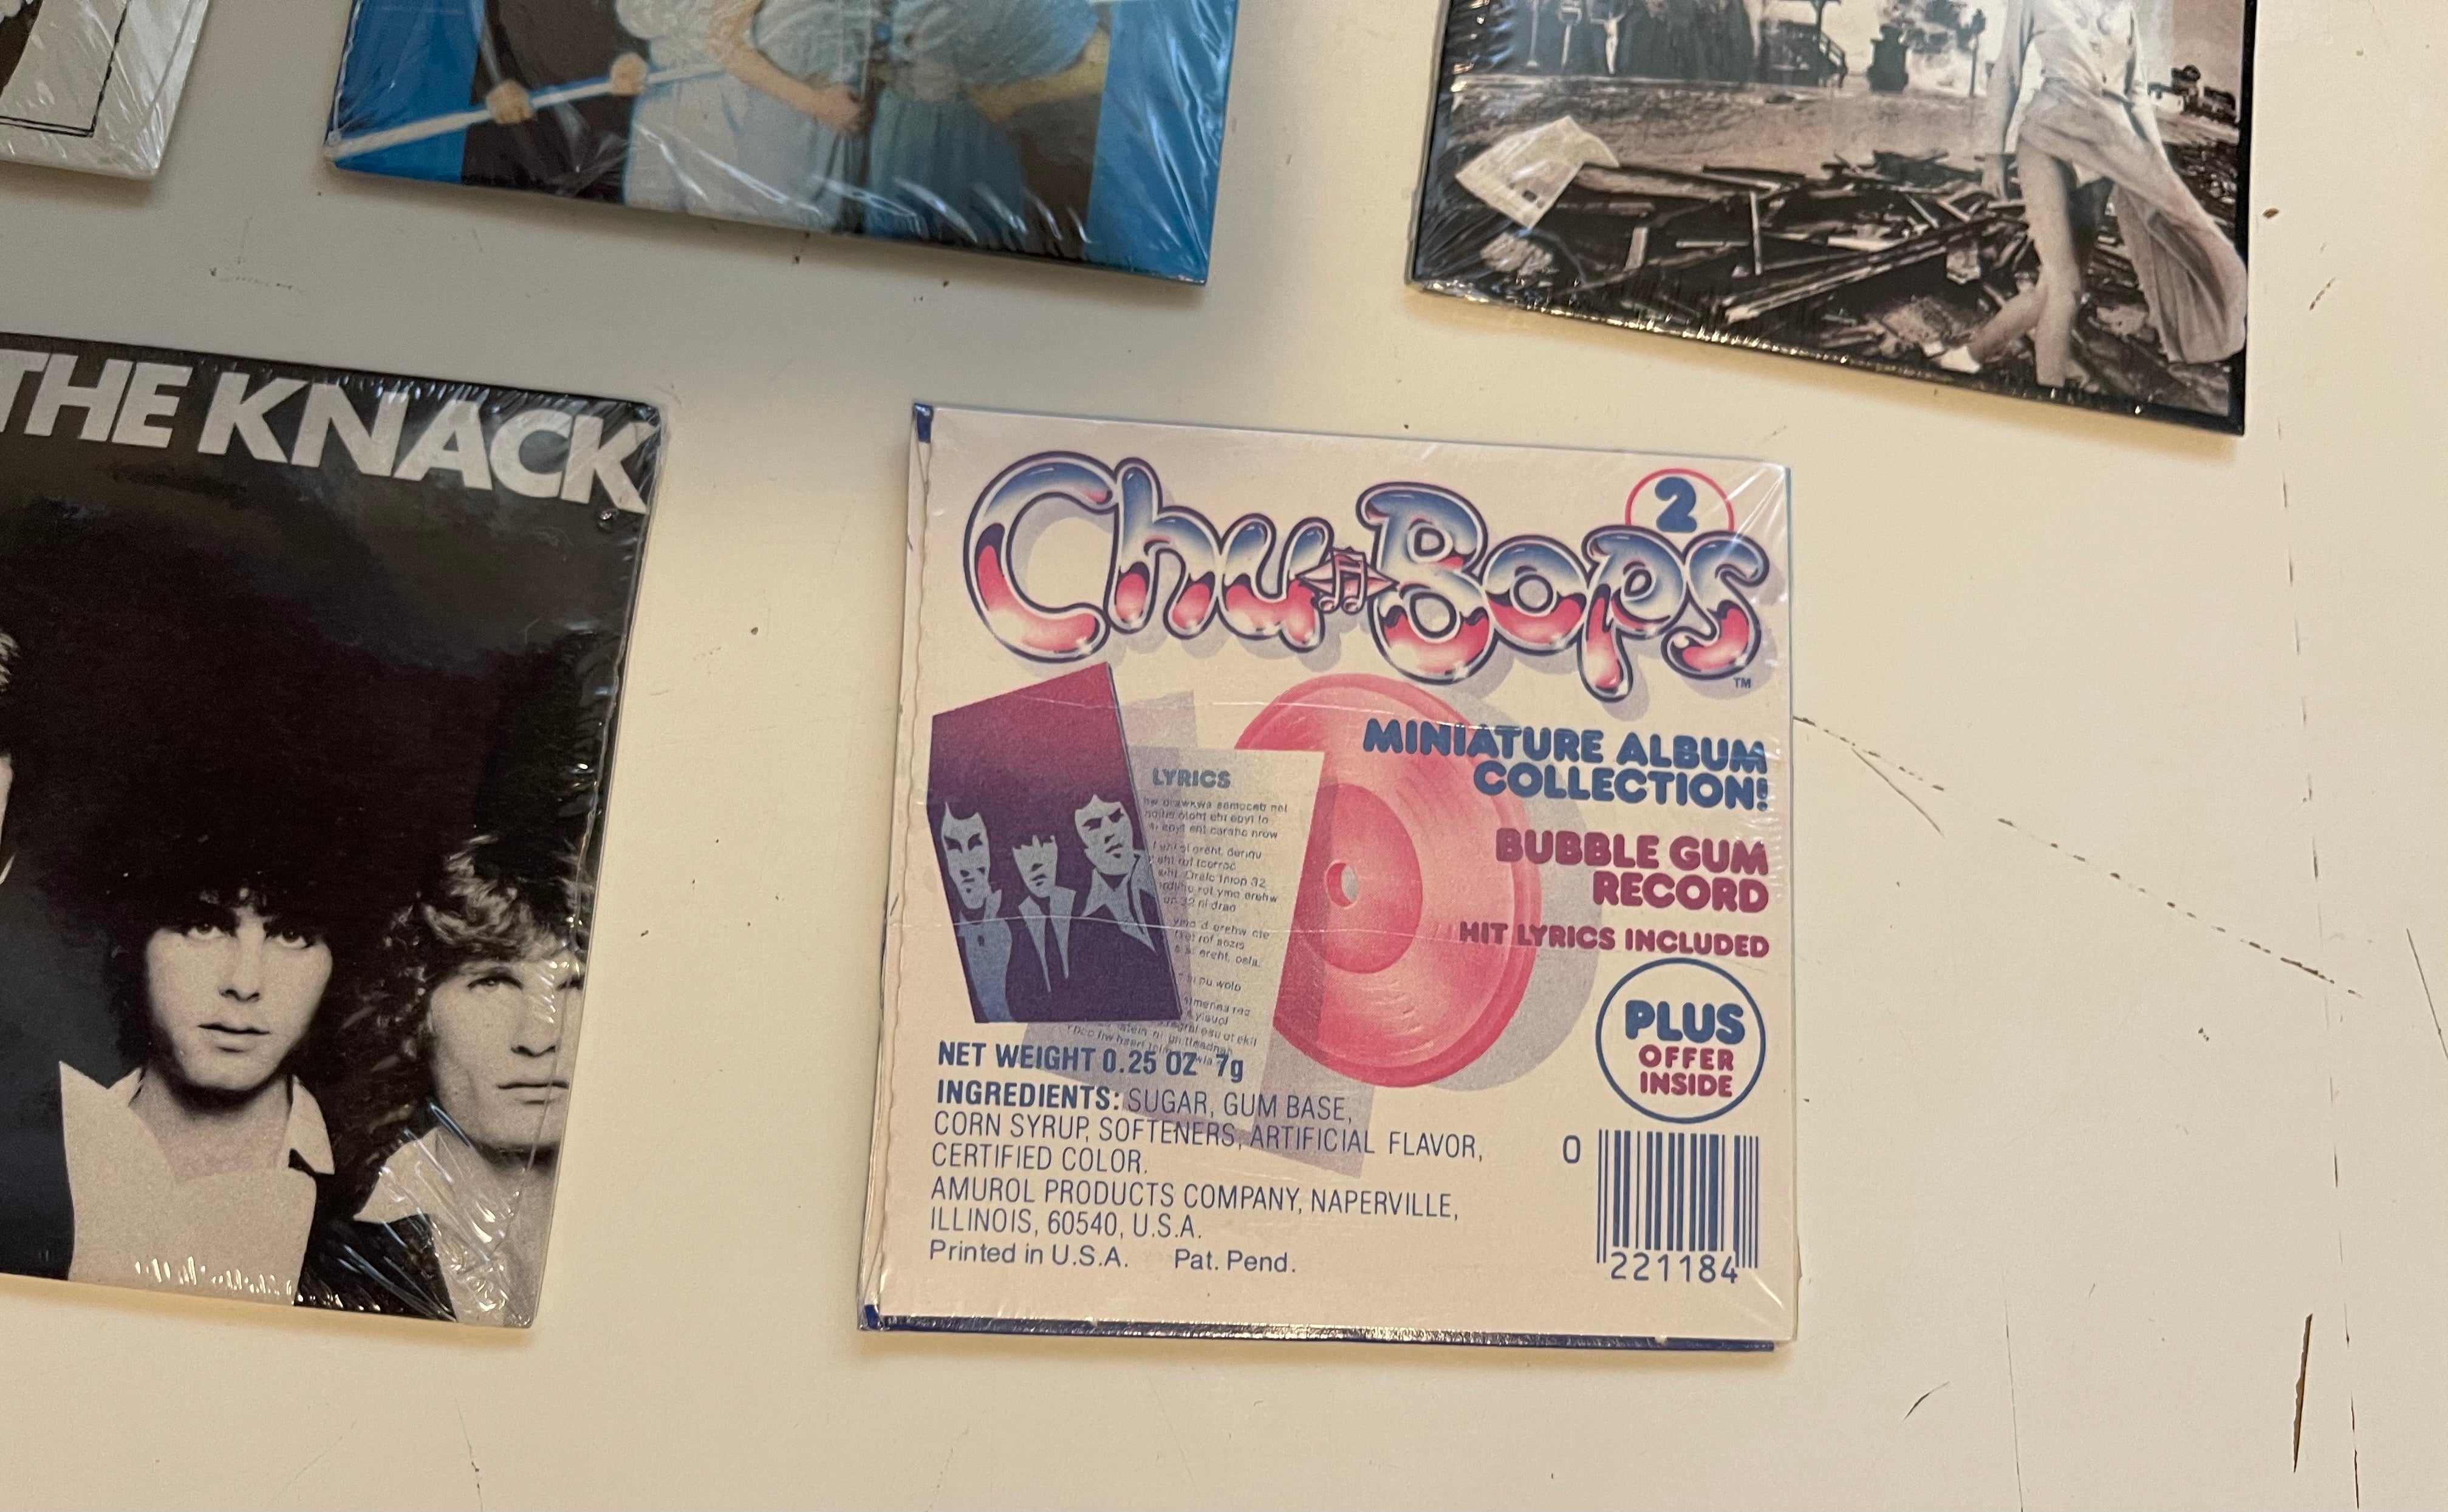 Chu-Bops rare set with Abba, Rush and more from 1979